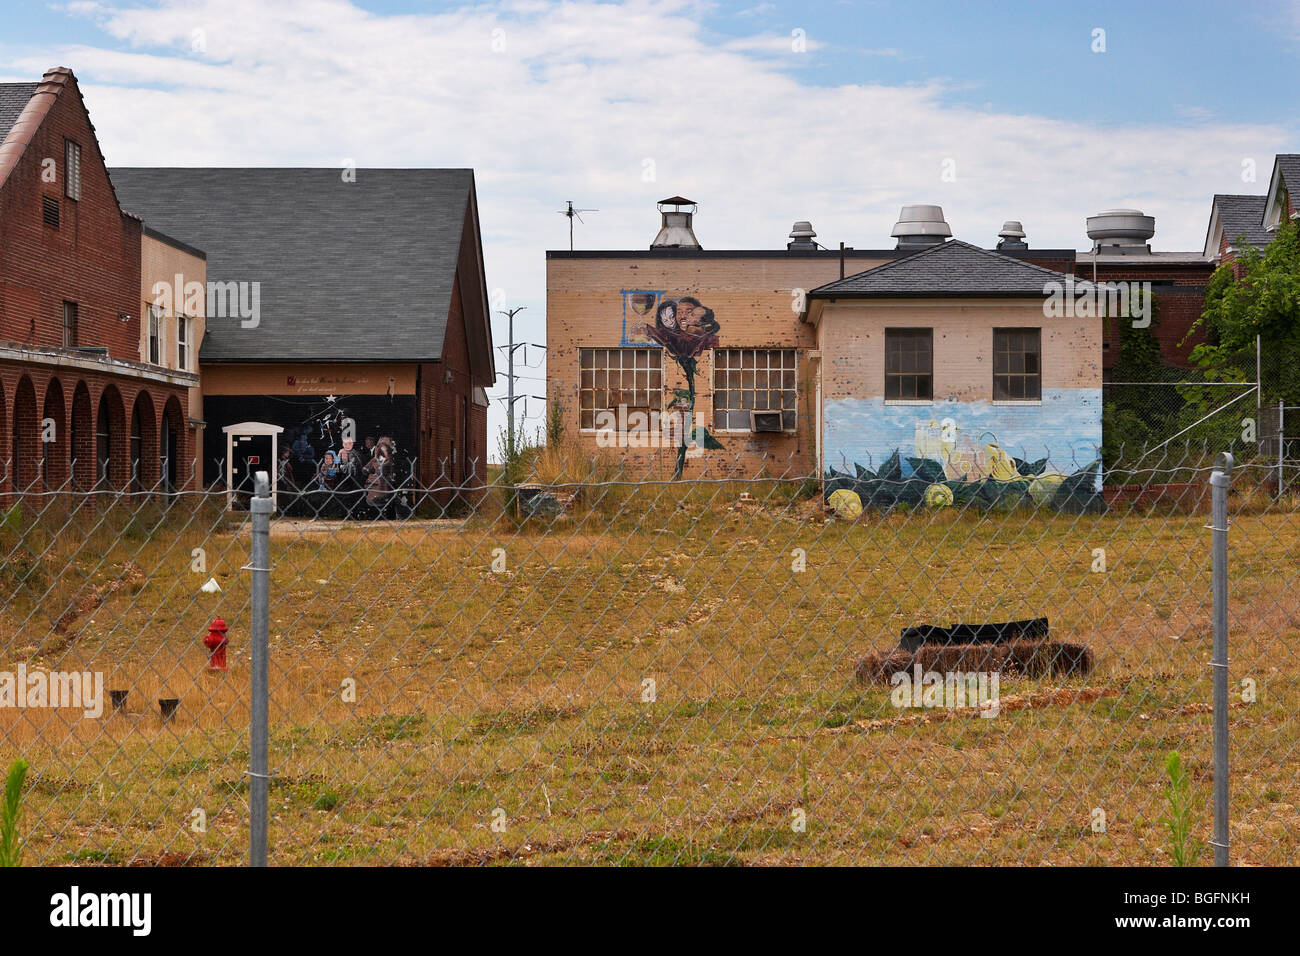 Buildings with painted murals behind a chain-link fence at the former Lorton Correctional Complex, Lorton, Virginia. Stock Photo